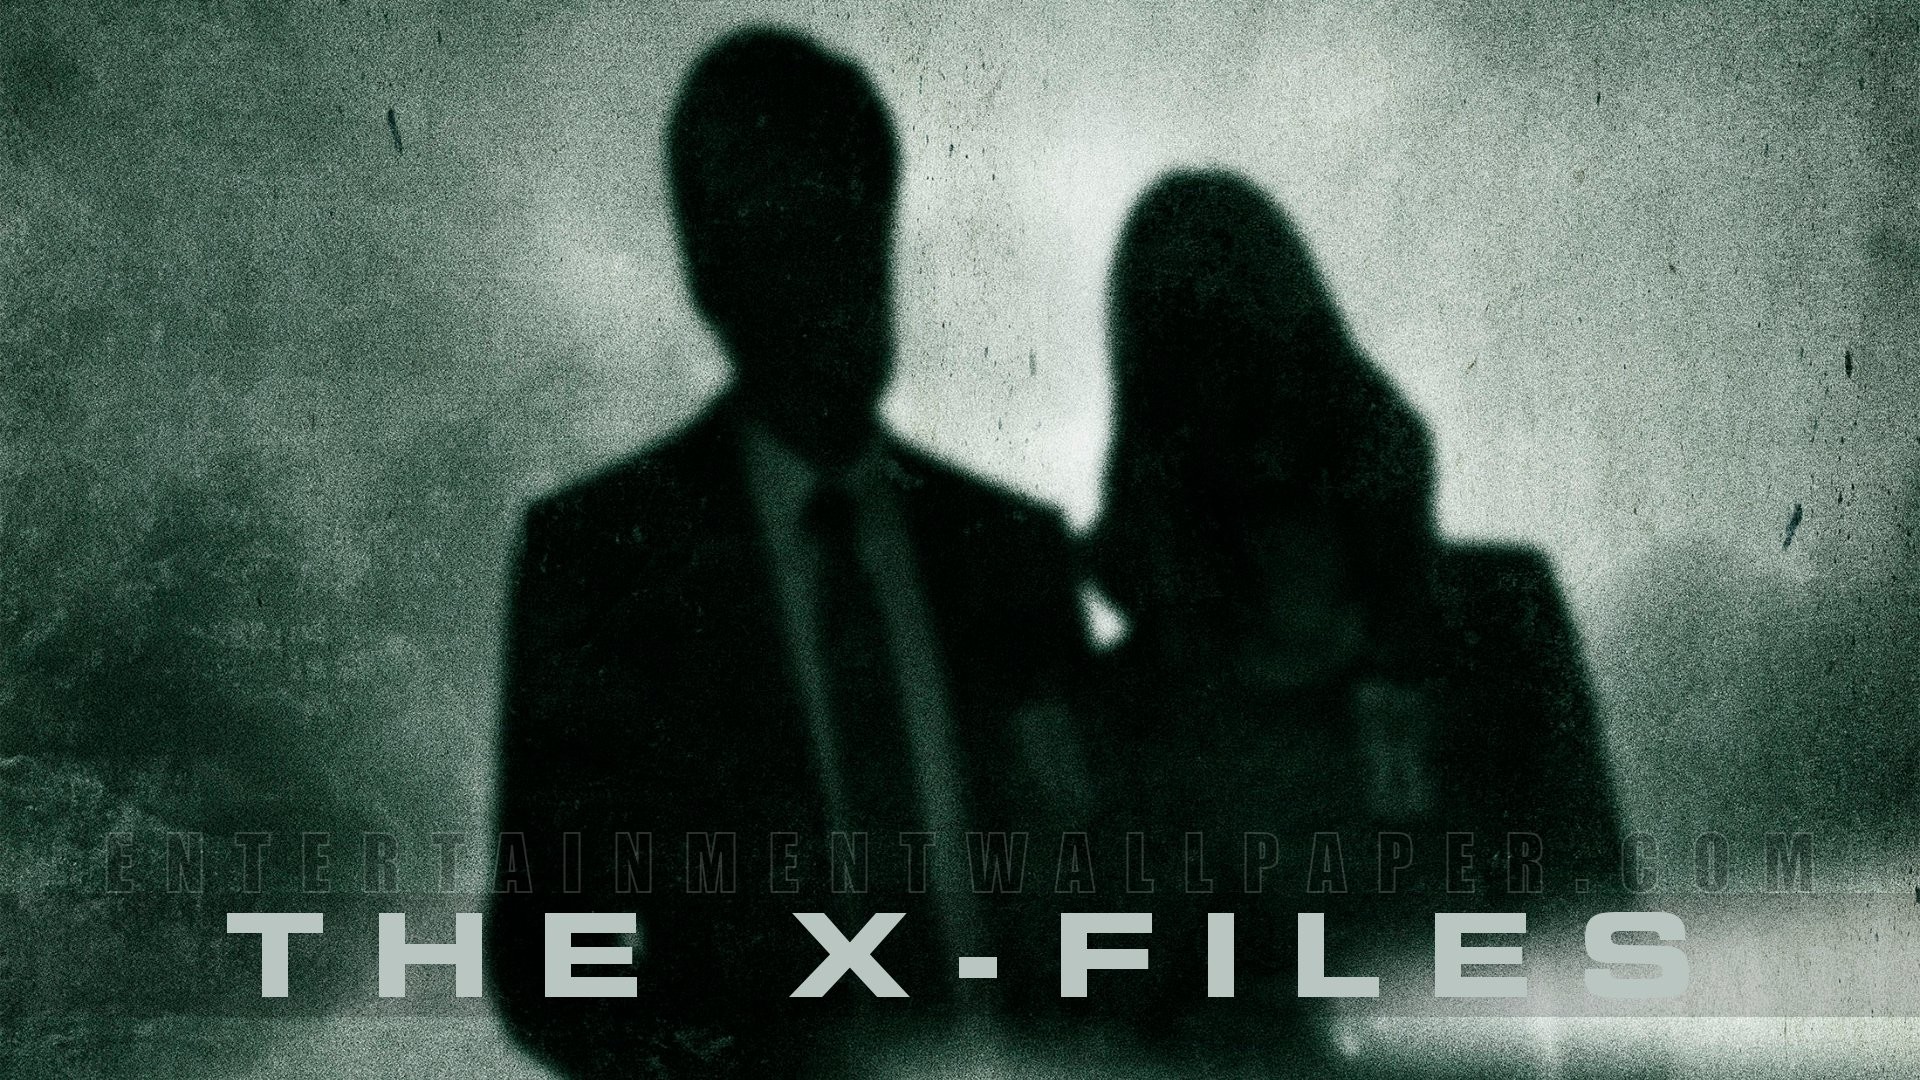 1920x1080 The X-Files Wallpaper - Original size, download now.